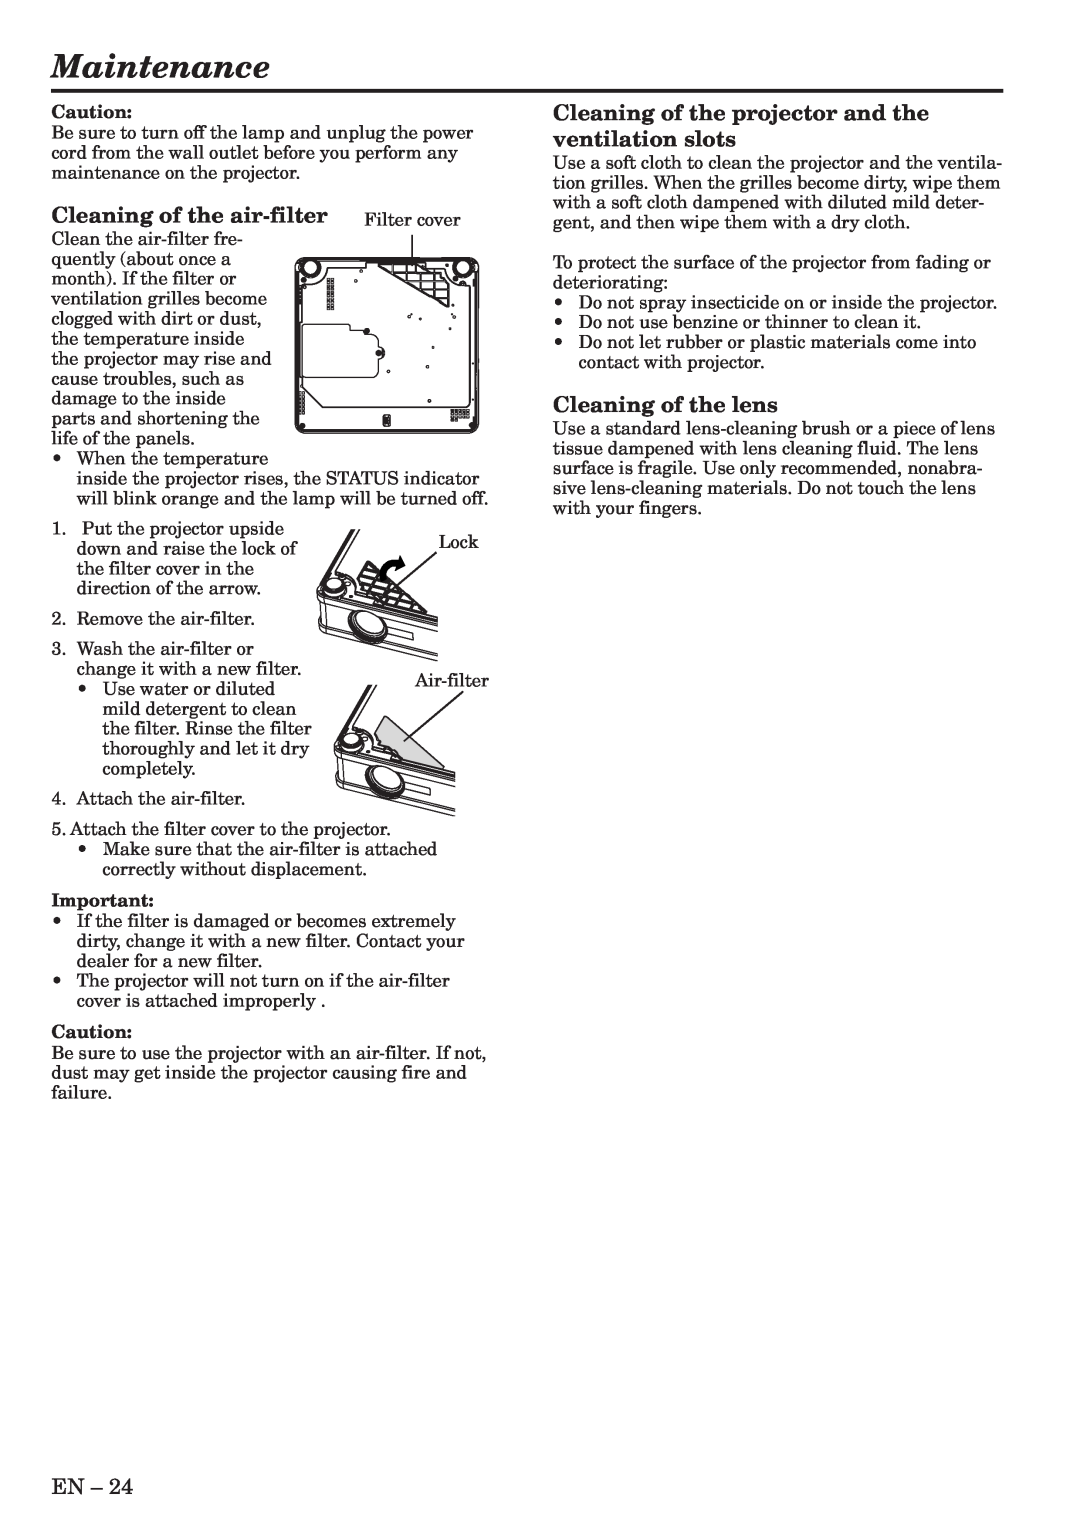 Mitsubishi Electronics XL6U user manual Maintenance, Cleaning of the air-filter Filter cover, Cleaning of the lens 